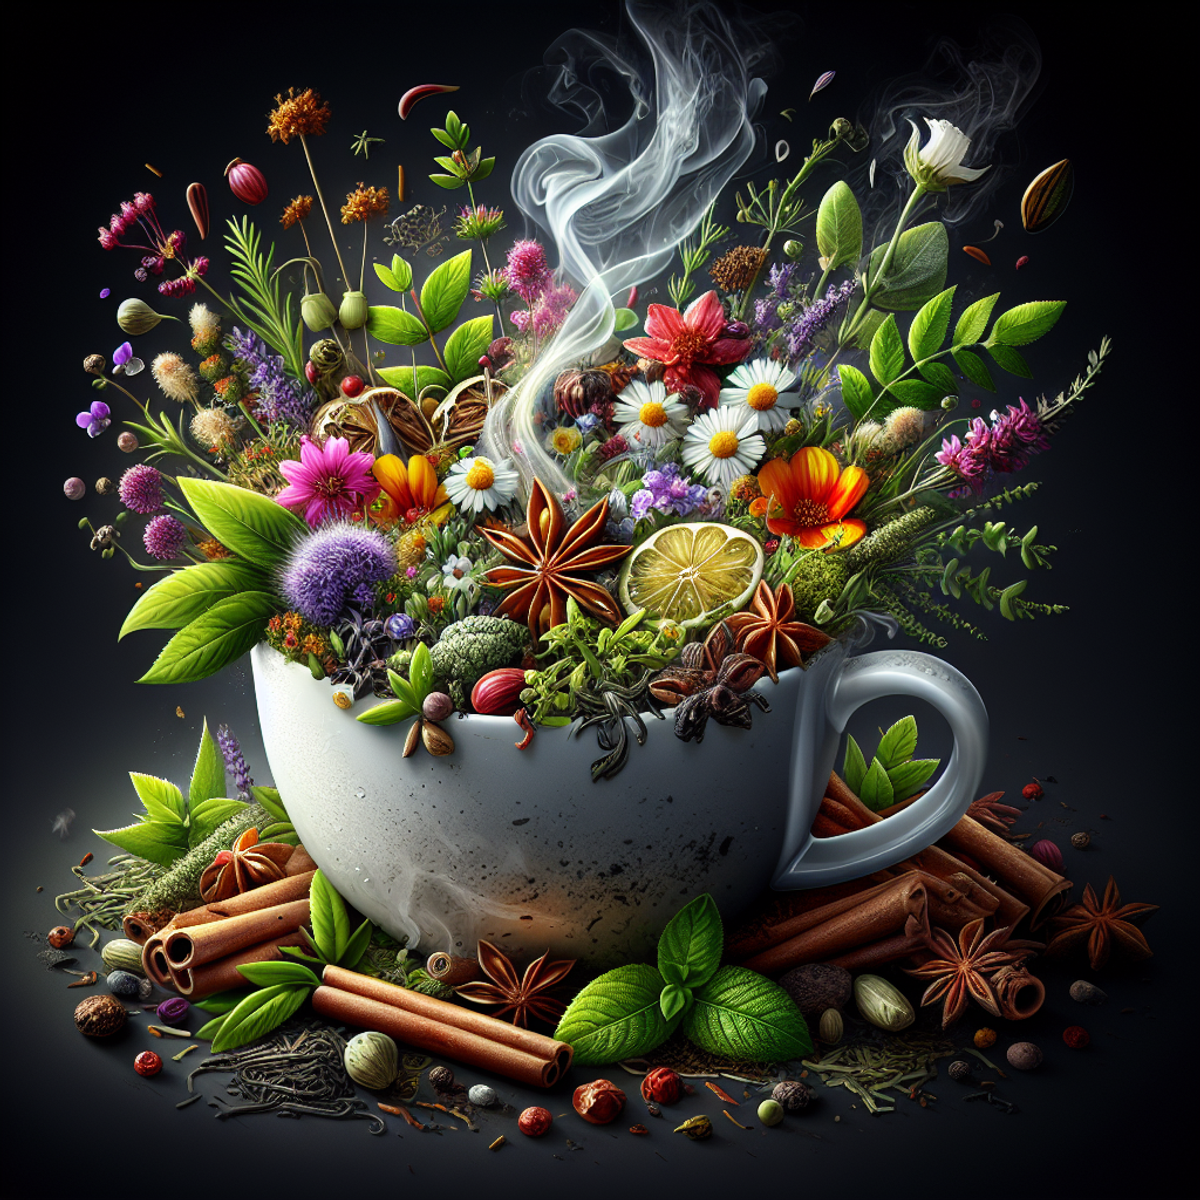 A close-up image of a cup filled with an assortment of vibrant herbs, blooming flowers, and rich spices, with visible steam swirling upwards.